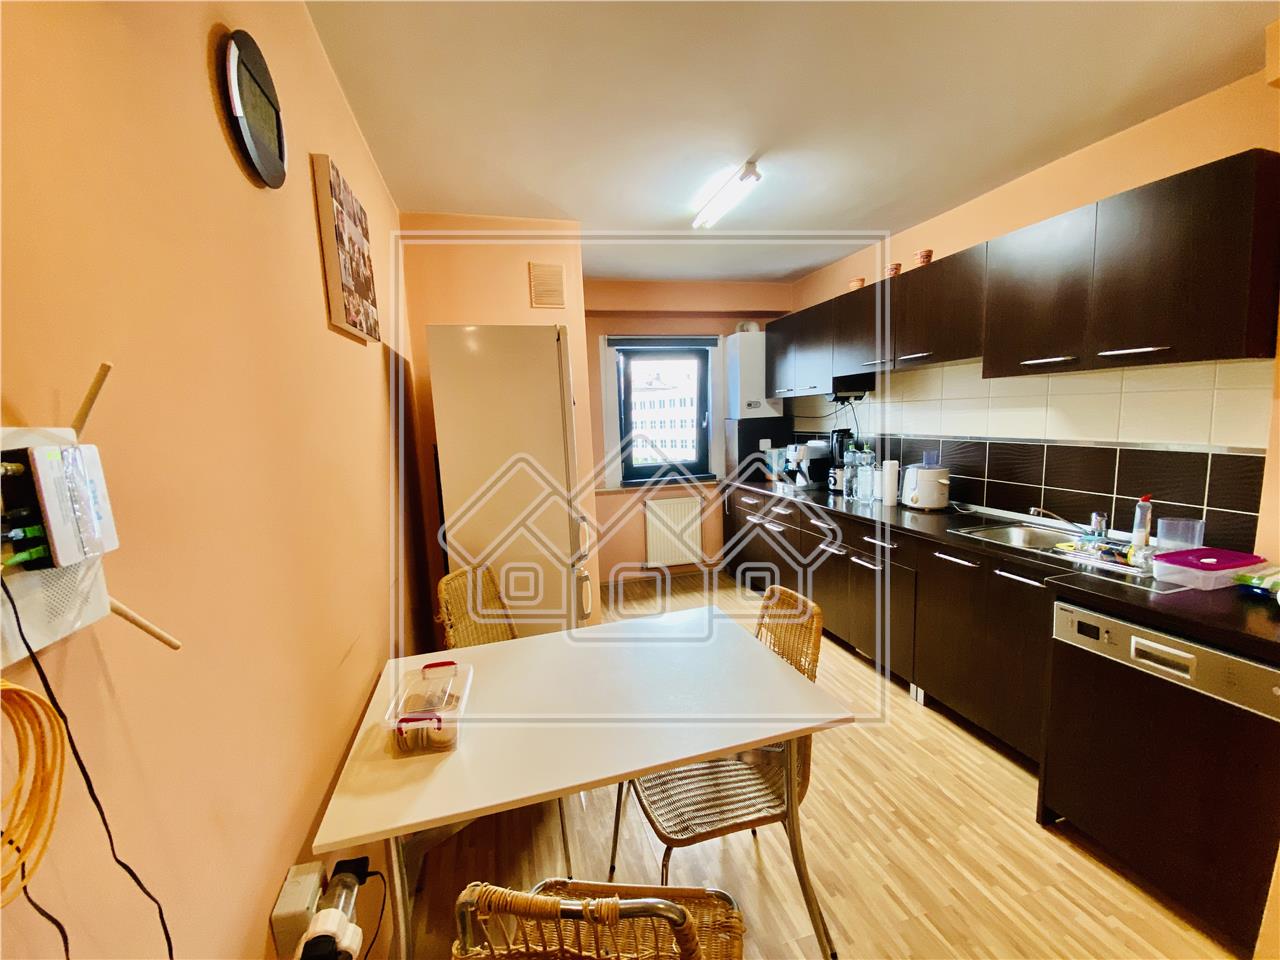 Apartment for sale in Sibiu - 3 rooms - 2 balconies - Swimming School